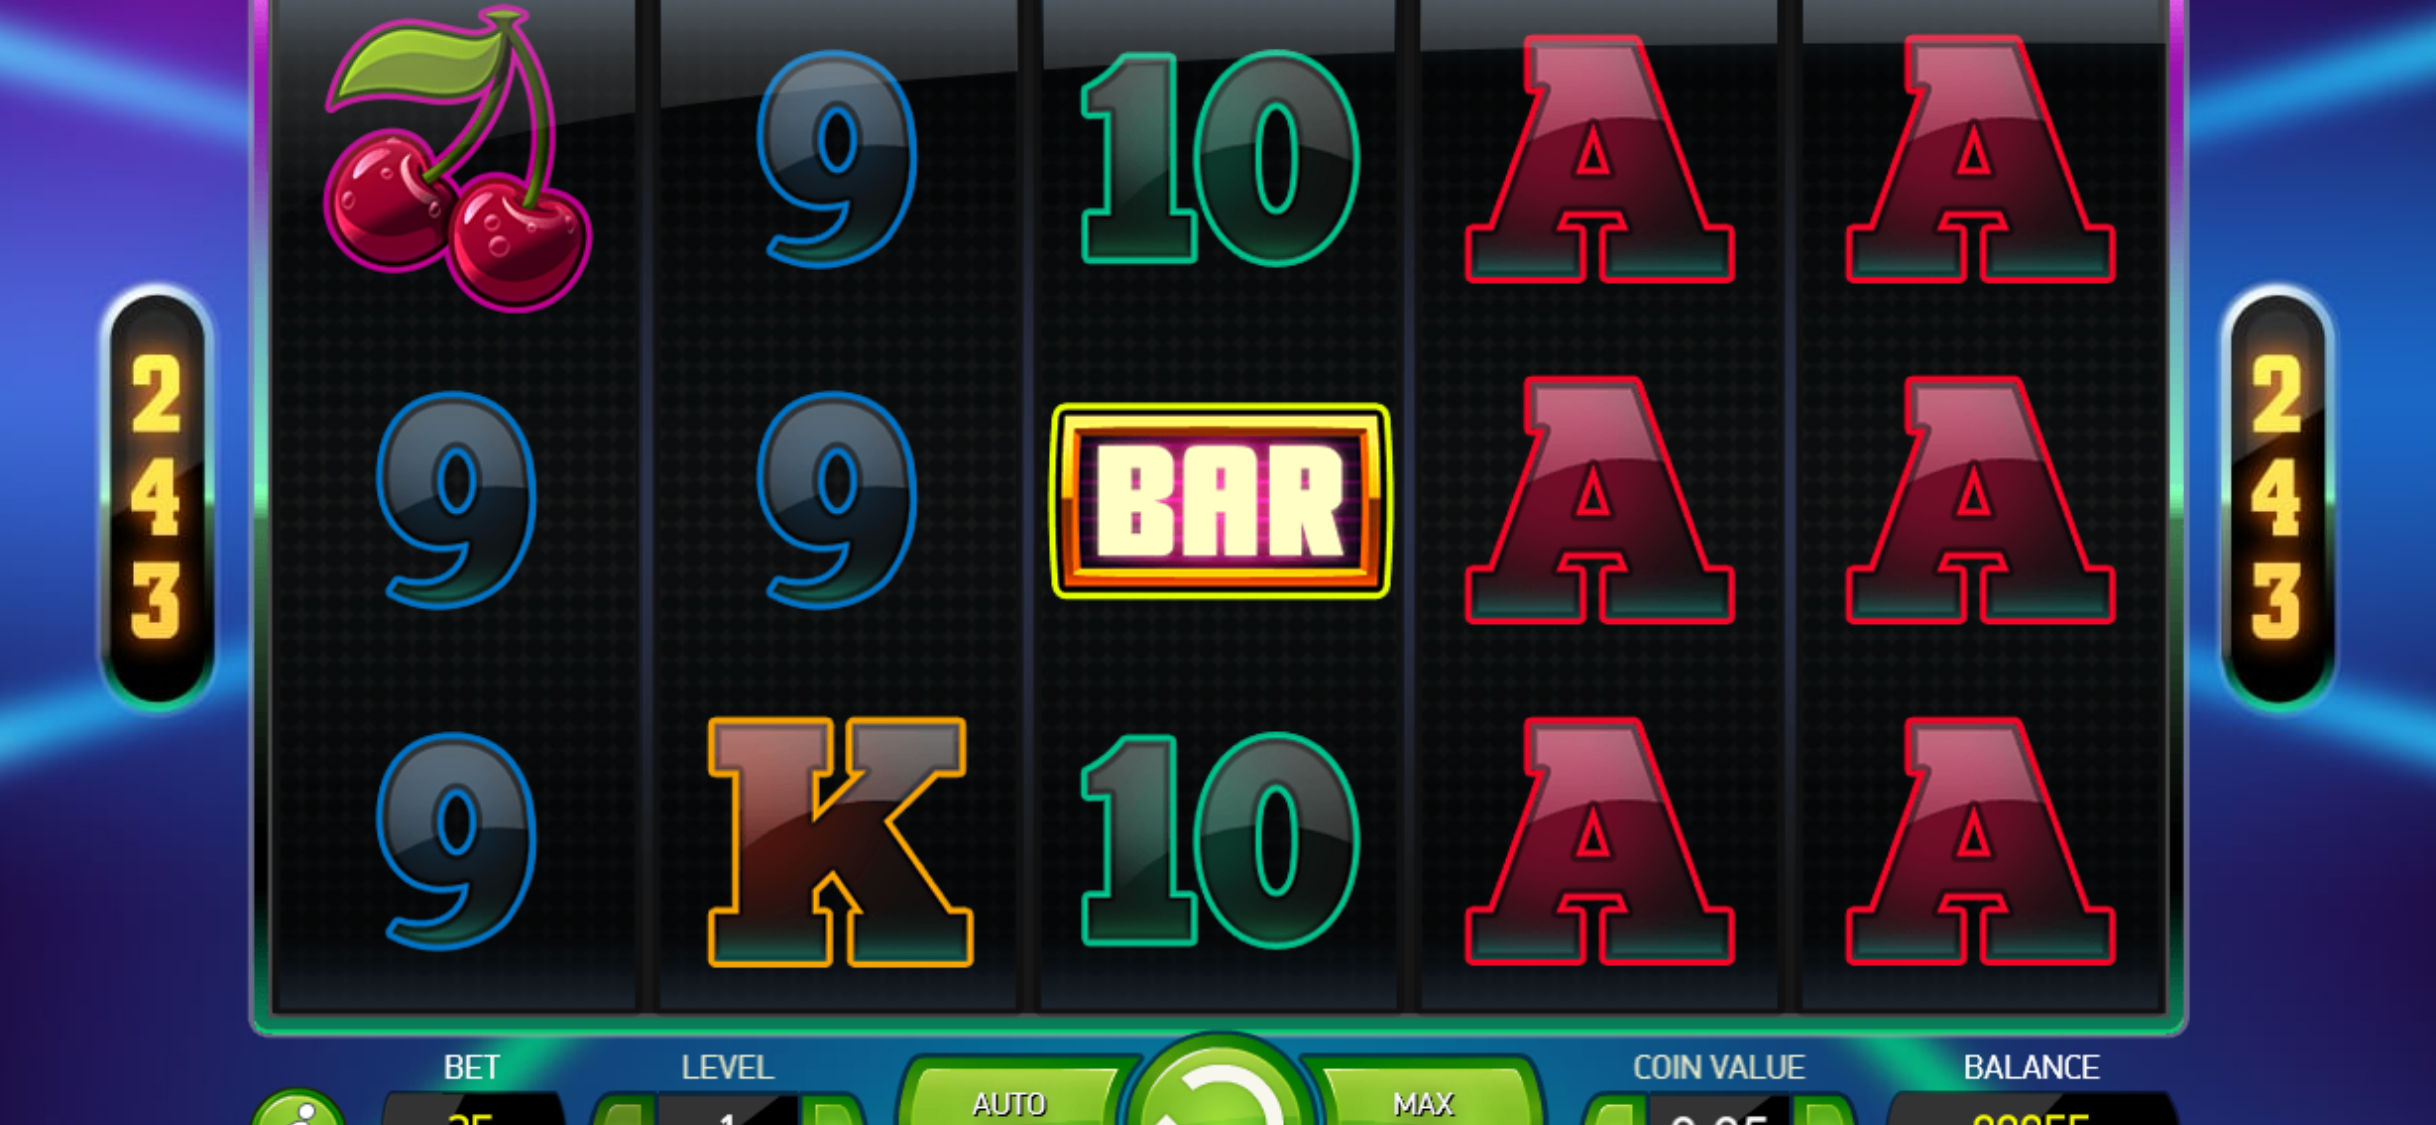 Casiplay Casino Mobile Slot Games Review